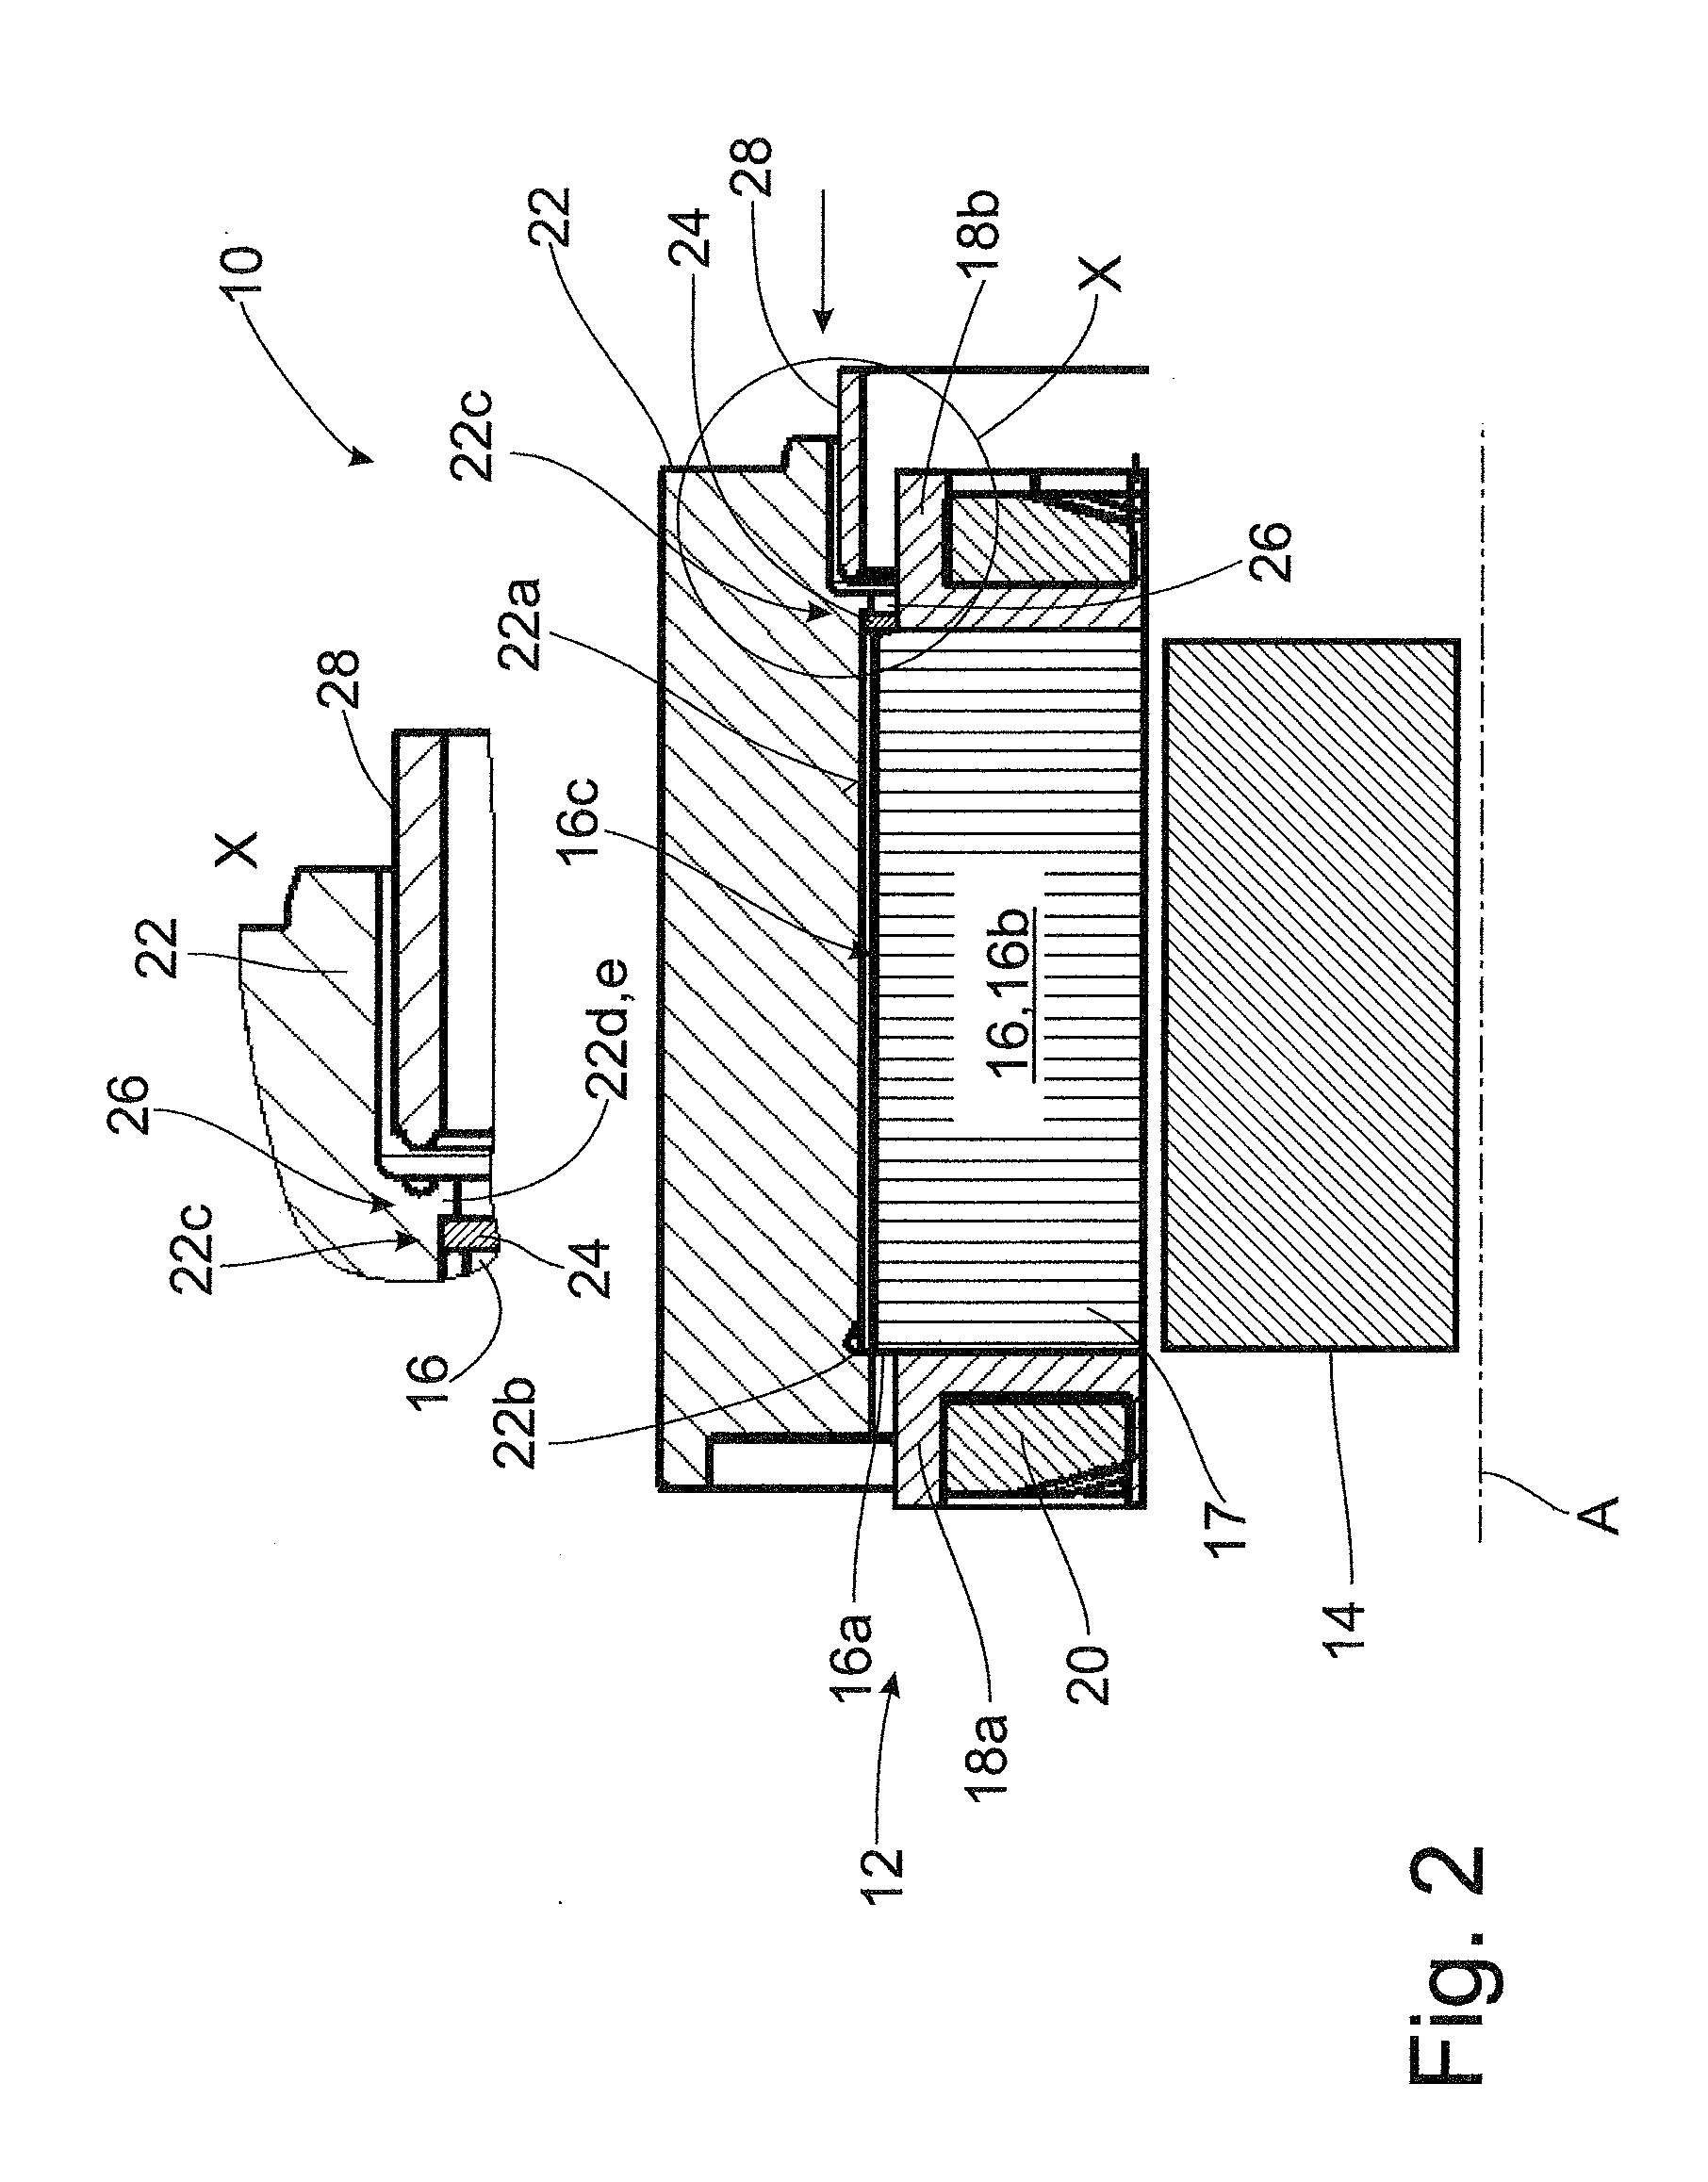 Modular Unit Comprising A Laminate Stack For An Electric Machine, Method For Producing Such A Modular Unit, And Electric Machine